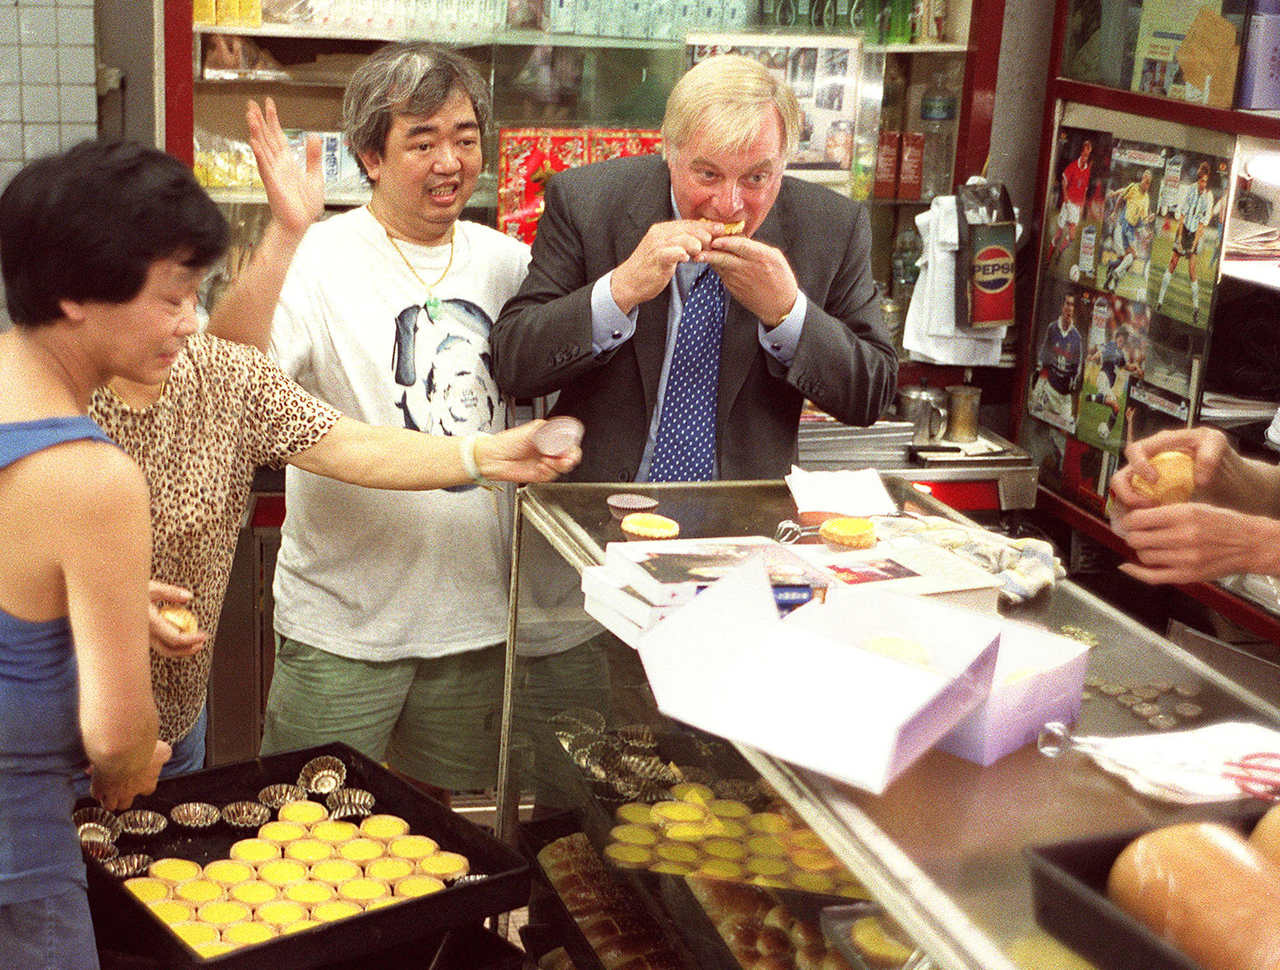 Chris Patten munches on an egg tart at Tai Cheong Bakery in Central, 199?